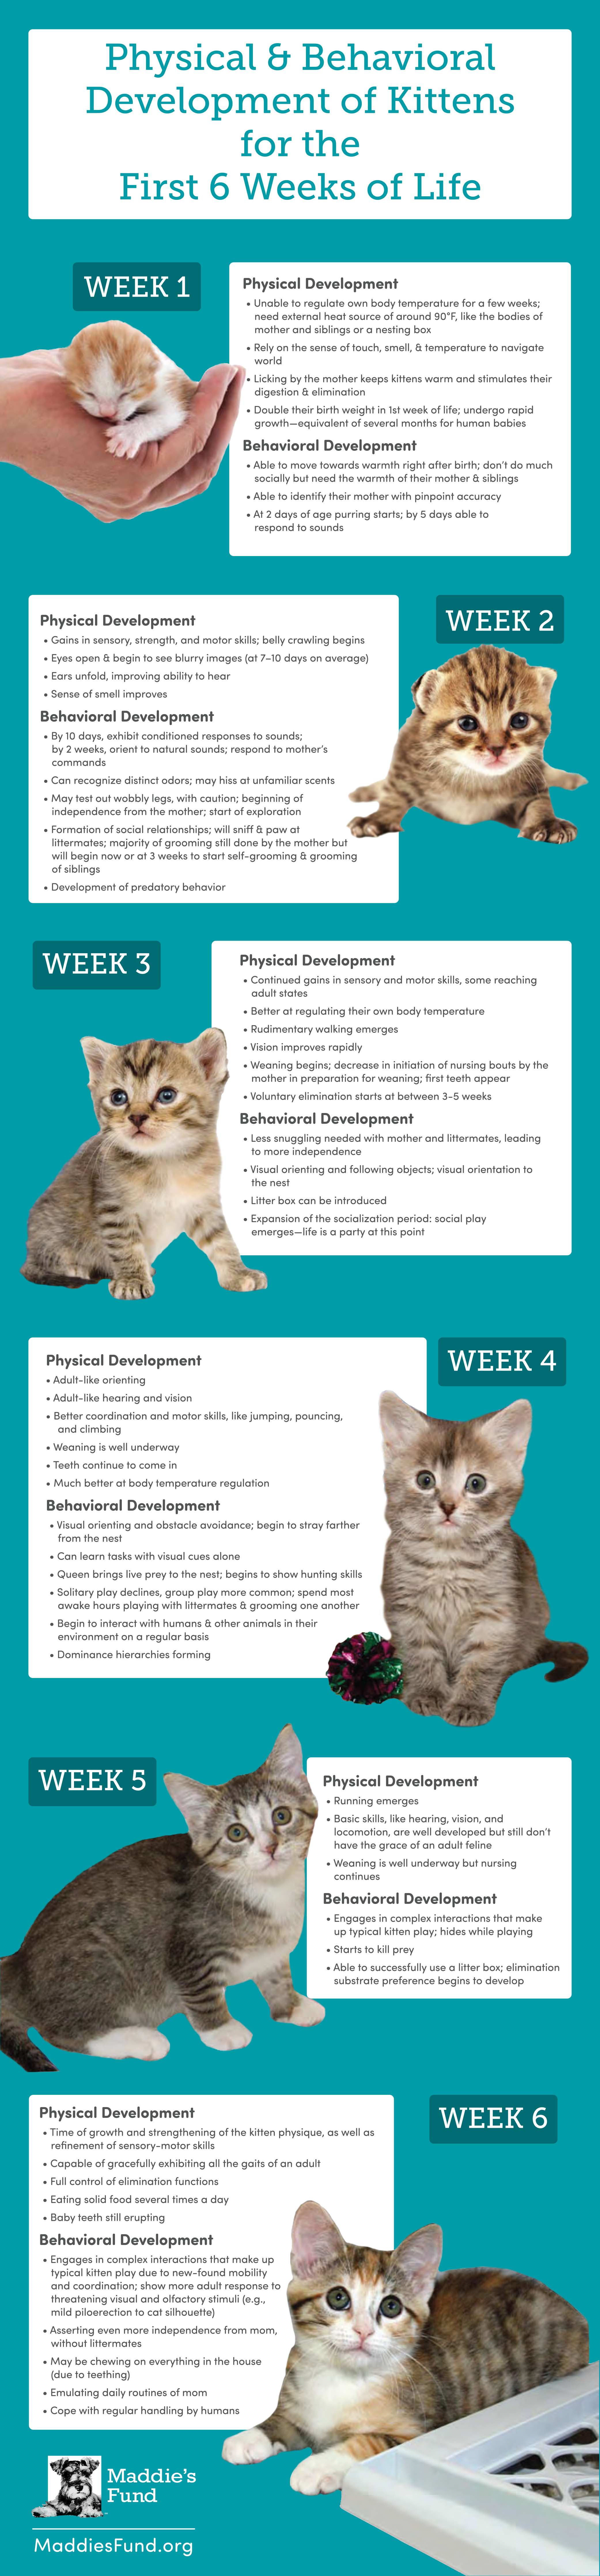 Graphic showing a chart of milestones for Physical and Behavioral Development for kittens for the furst 6 weeks of life